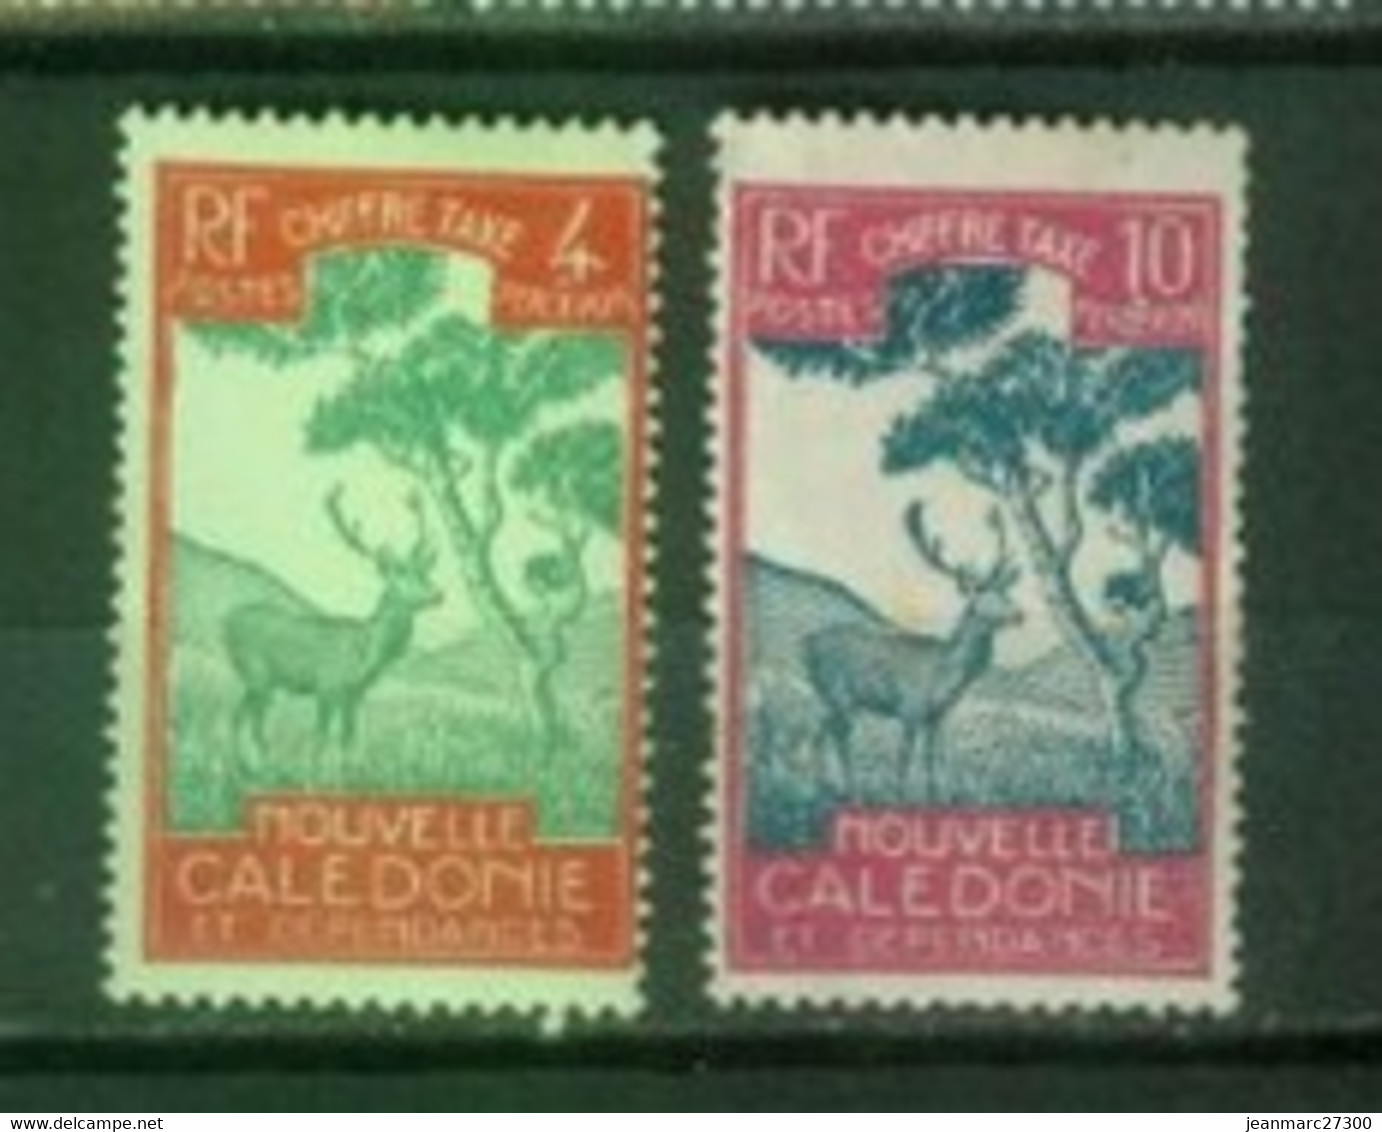 FC NCT06 - Nouvelle-Calédonie Taxe YT N° 27 29 Neufs * - Timbres-taxe